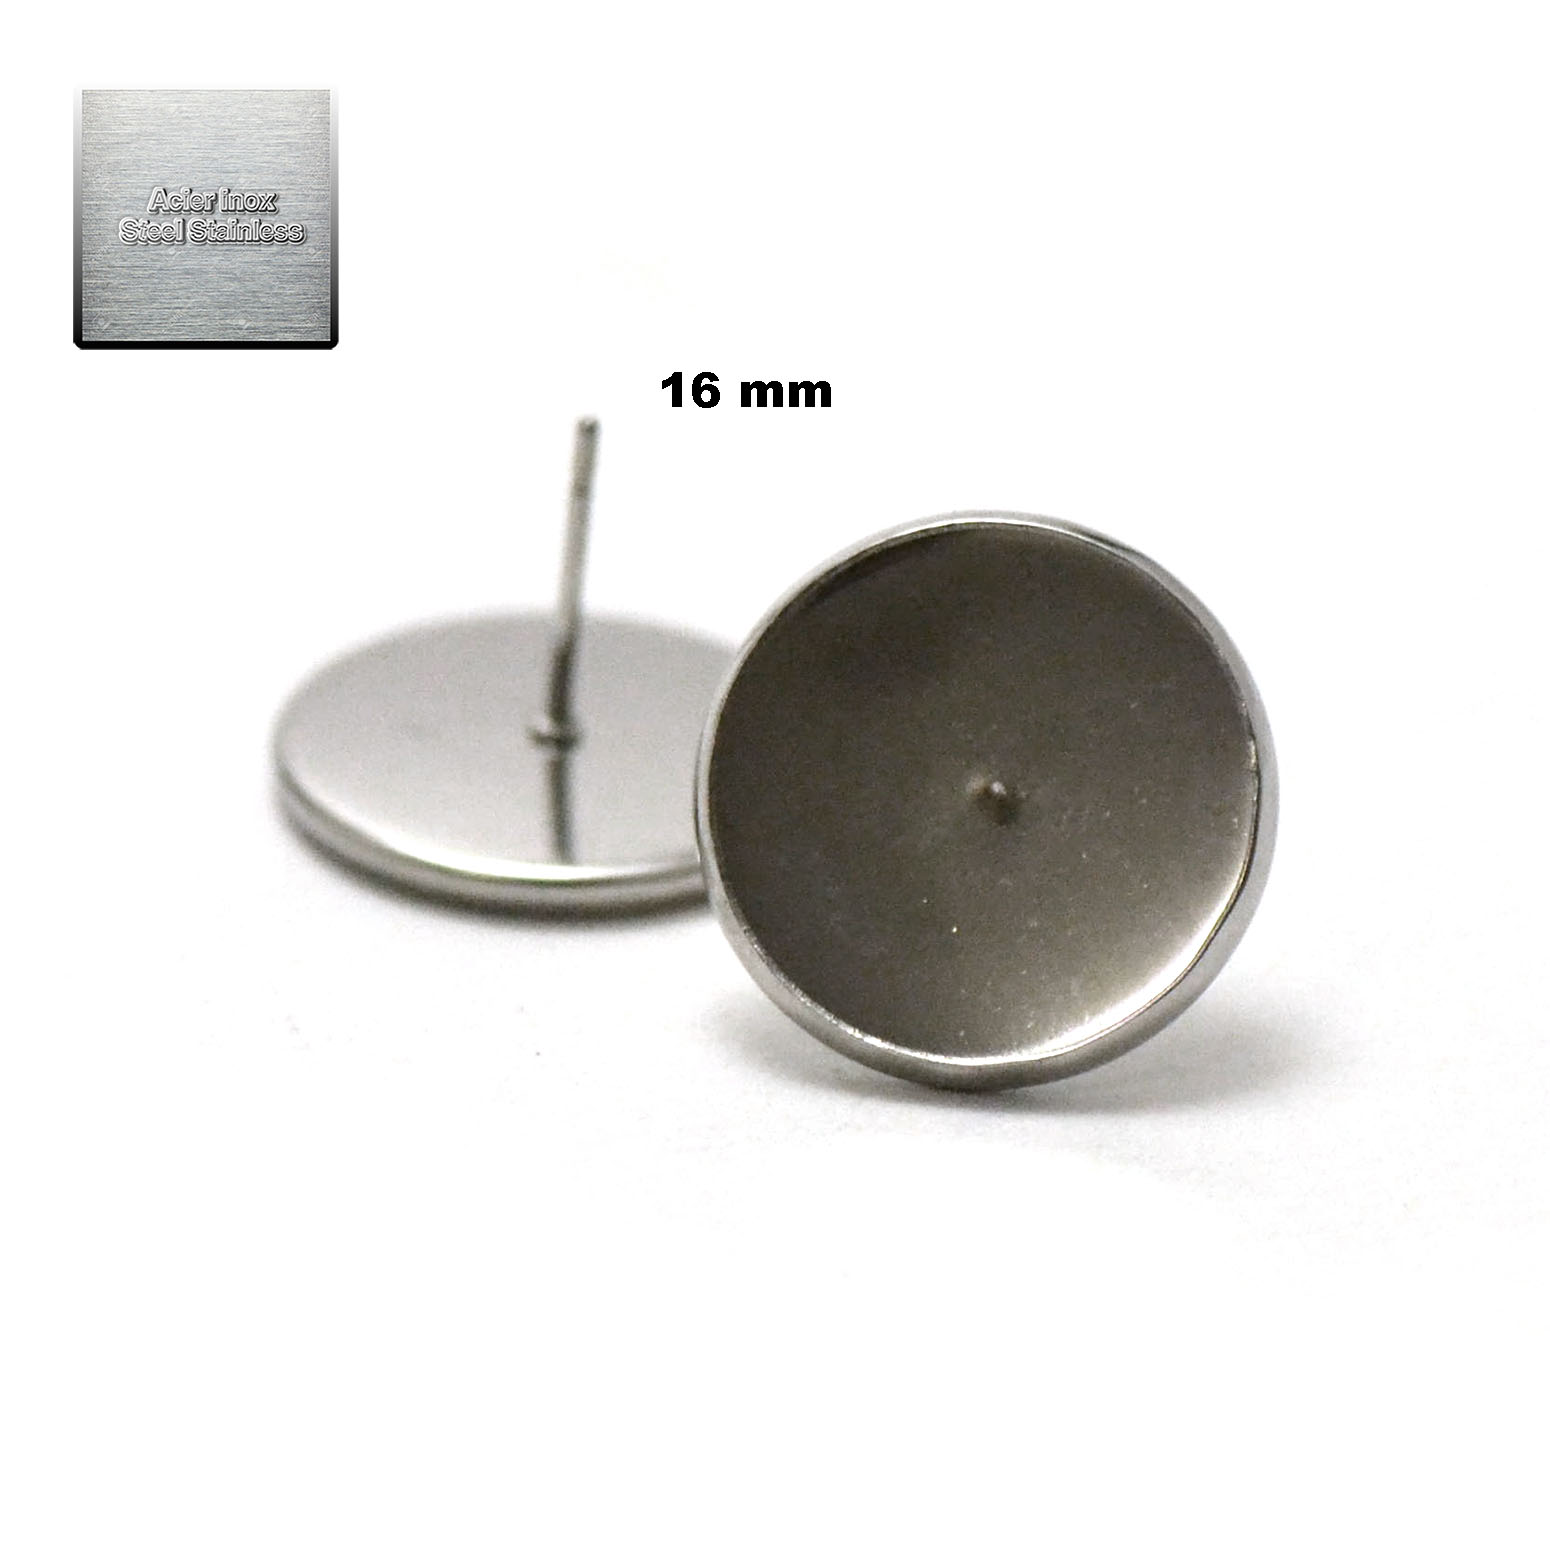 Acier inox: 10 puce d\'oreille support cabochon 16 mm, steel stainless